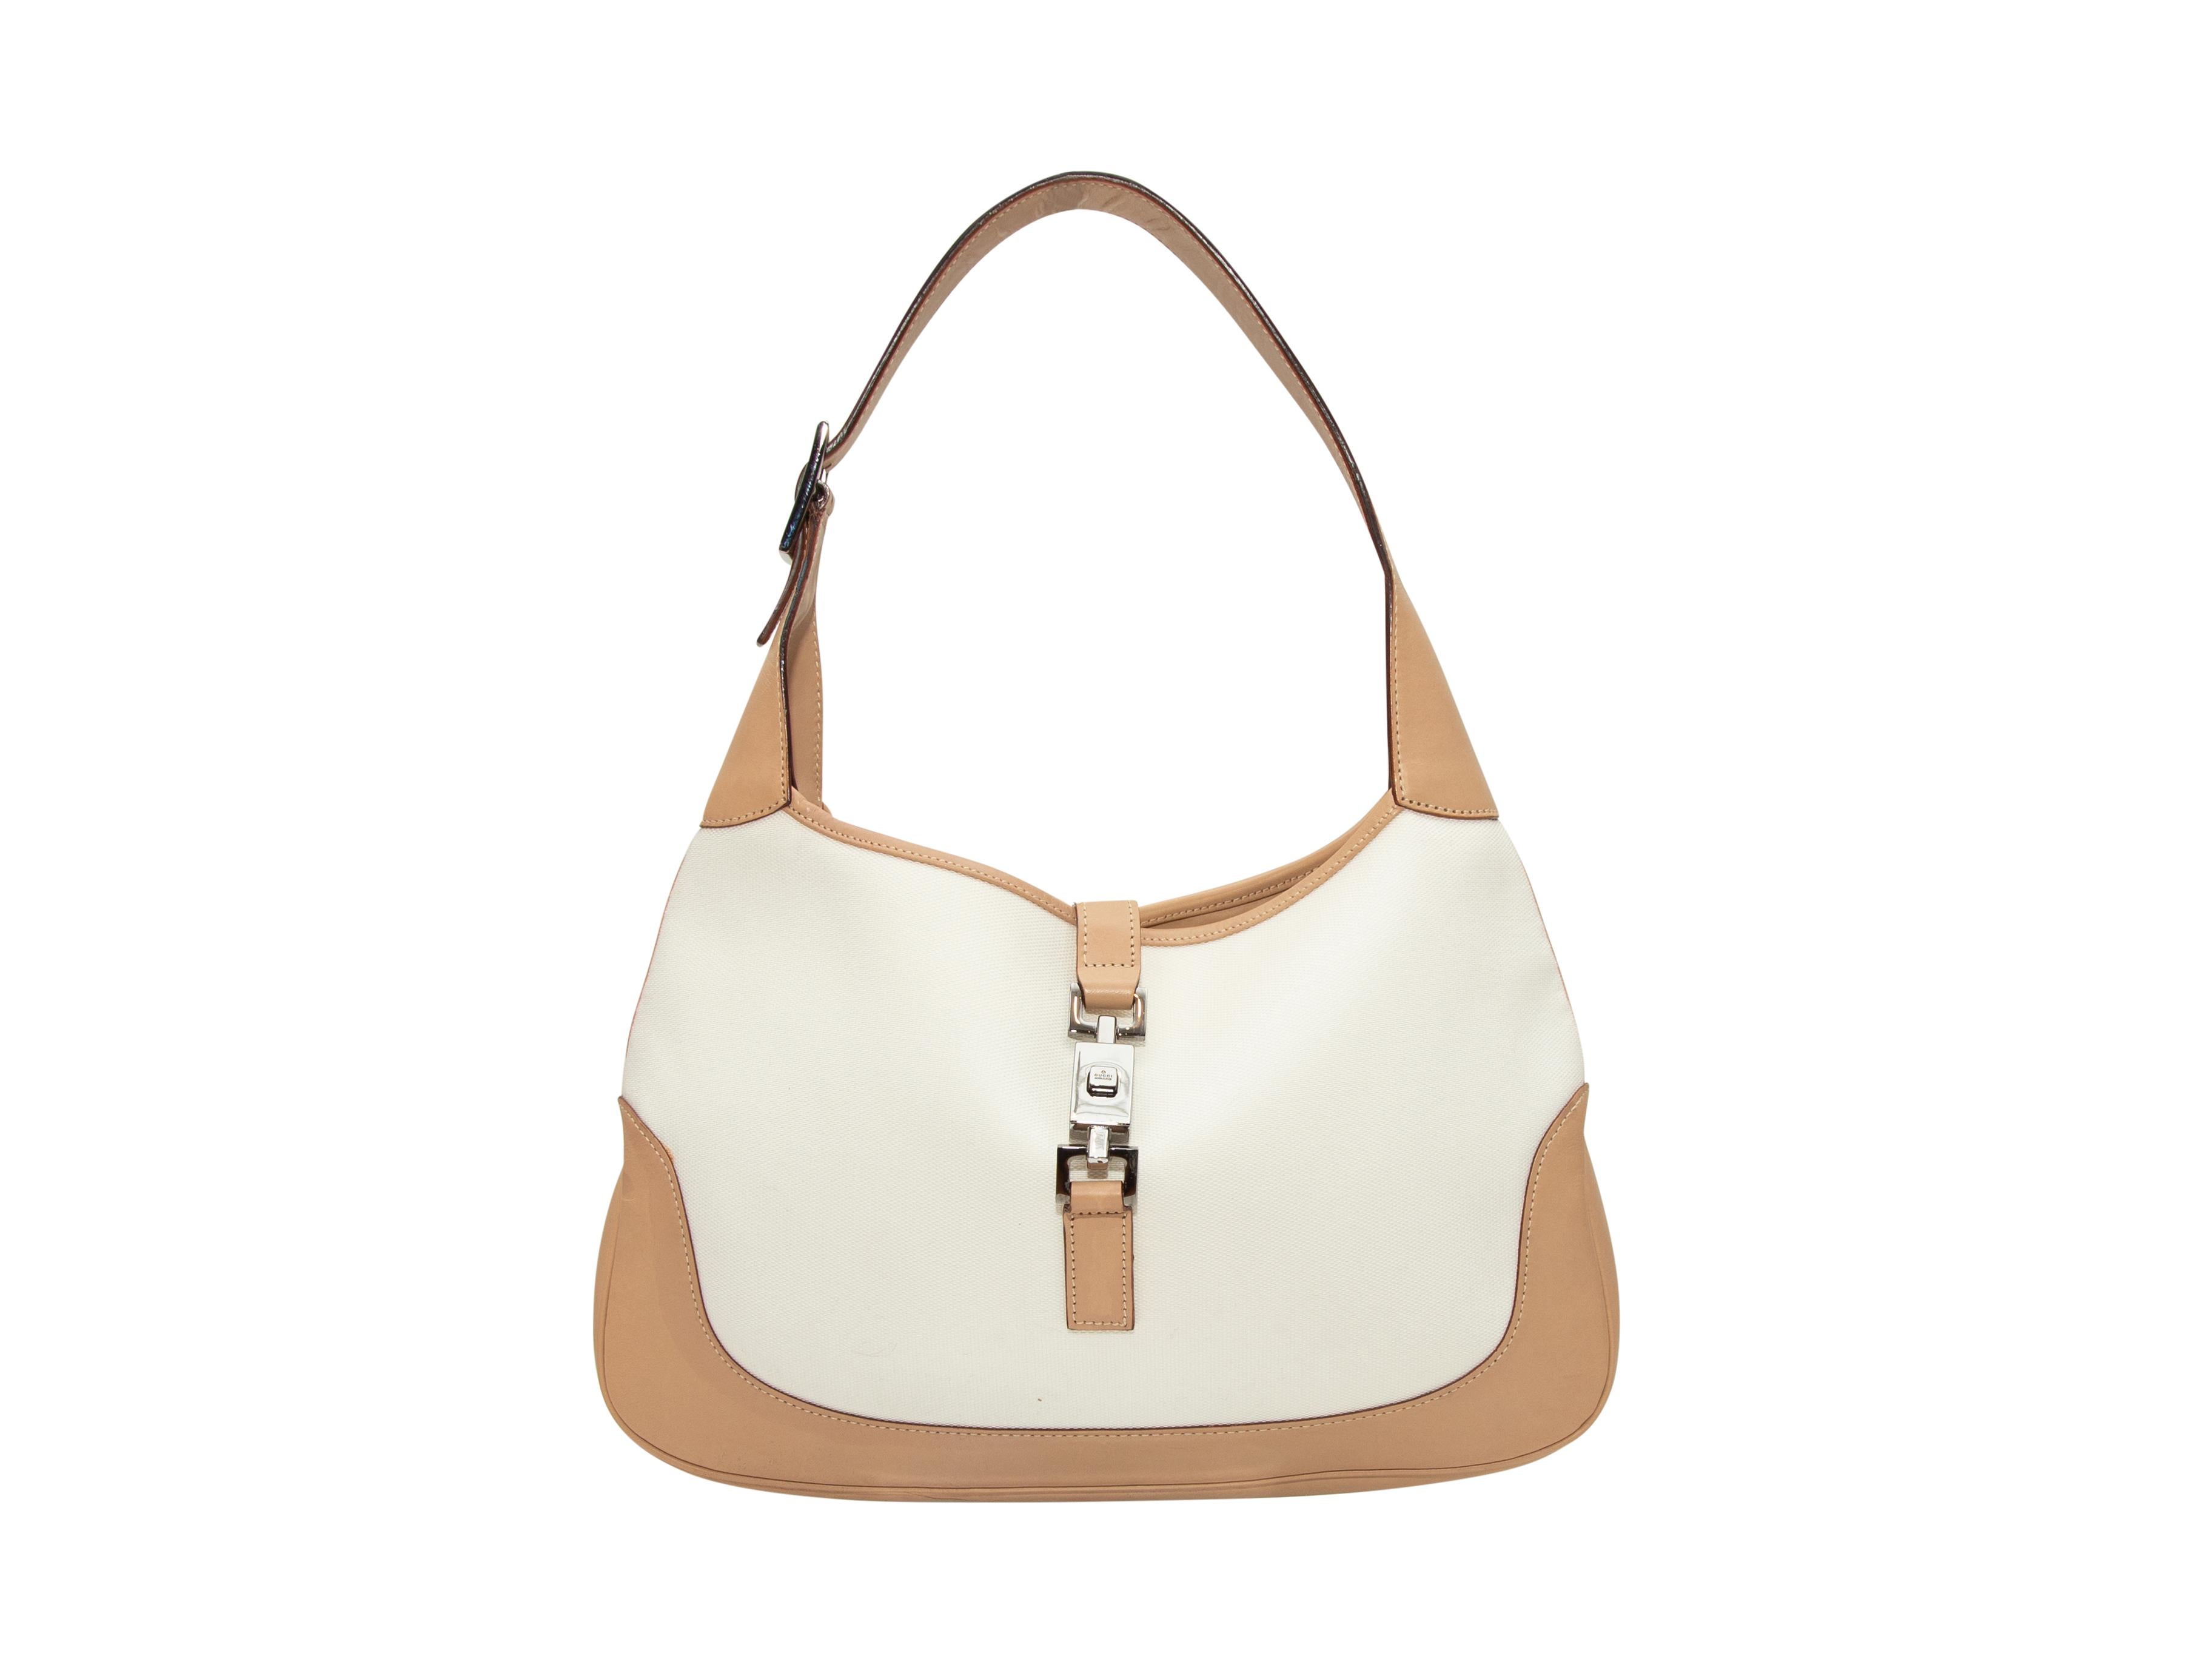 Product Details: Vintage White Gucci Canvas & Leather Jackie Bag. The Jackie Bag features a canvas body, tan leather trim, silver-tone hardware, a single shoulder strap, an interior zip pocket, and a buckle closure at the front. 13